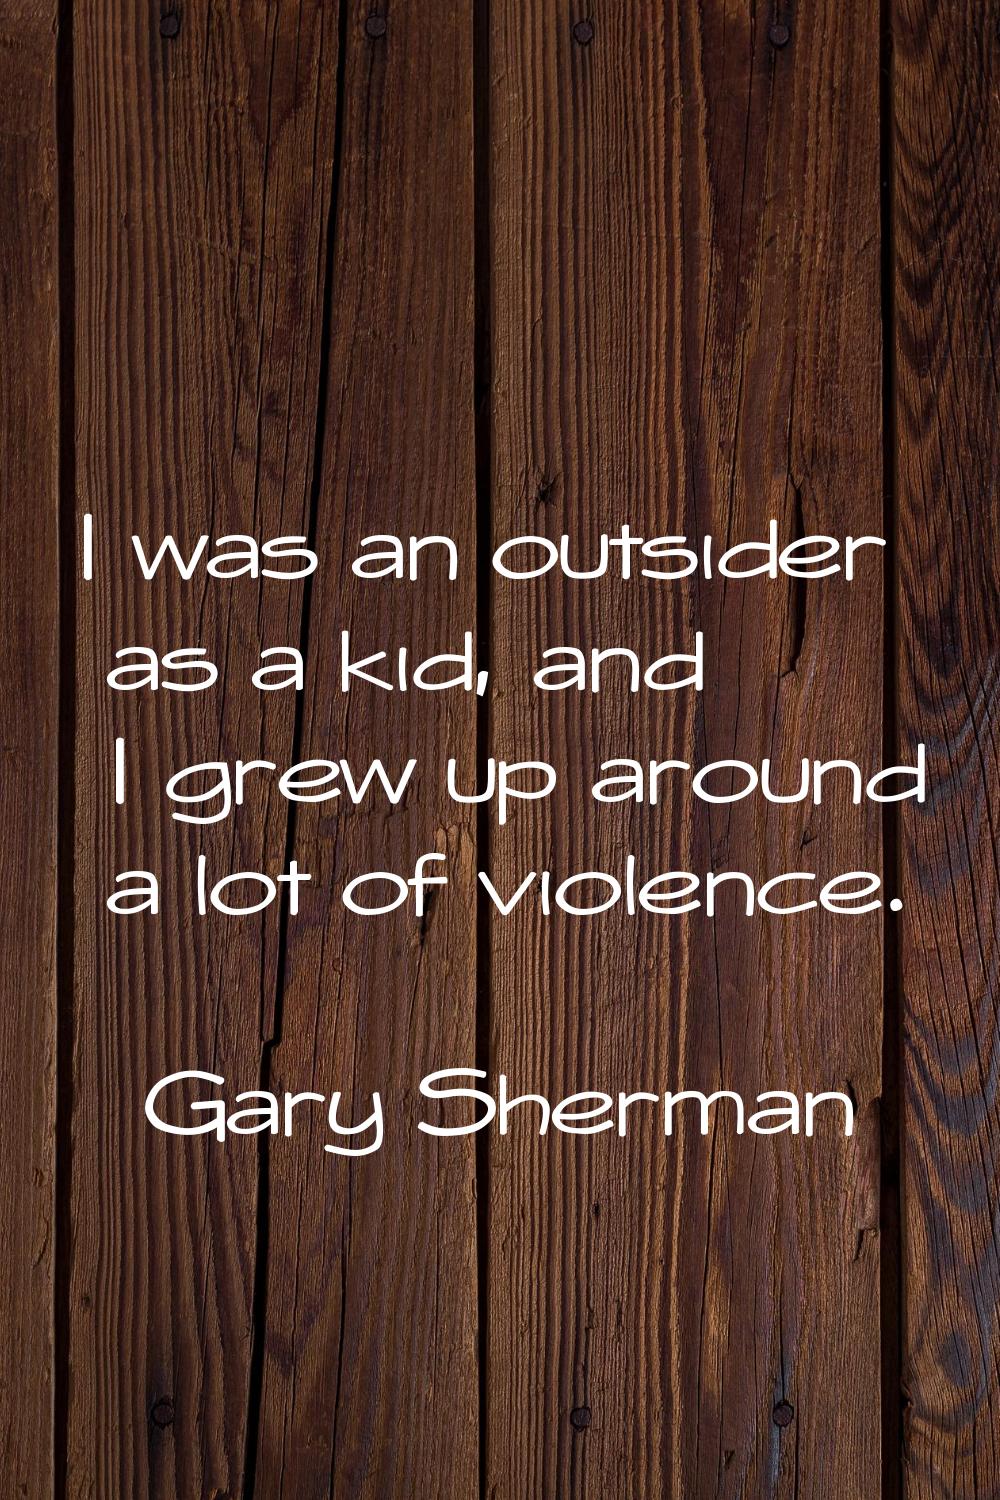 I was an outsider as a kid, and I grew up around a lot of violence.